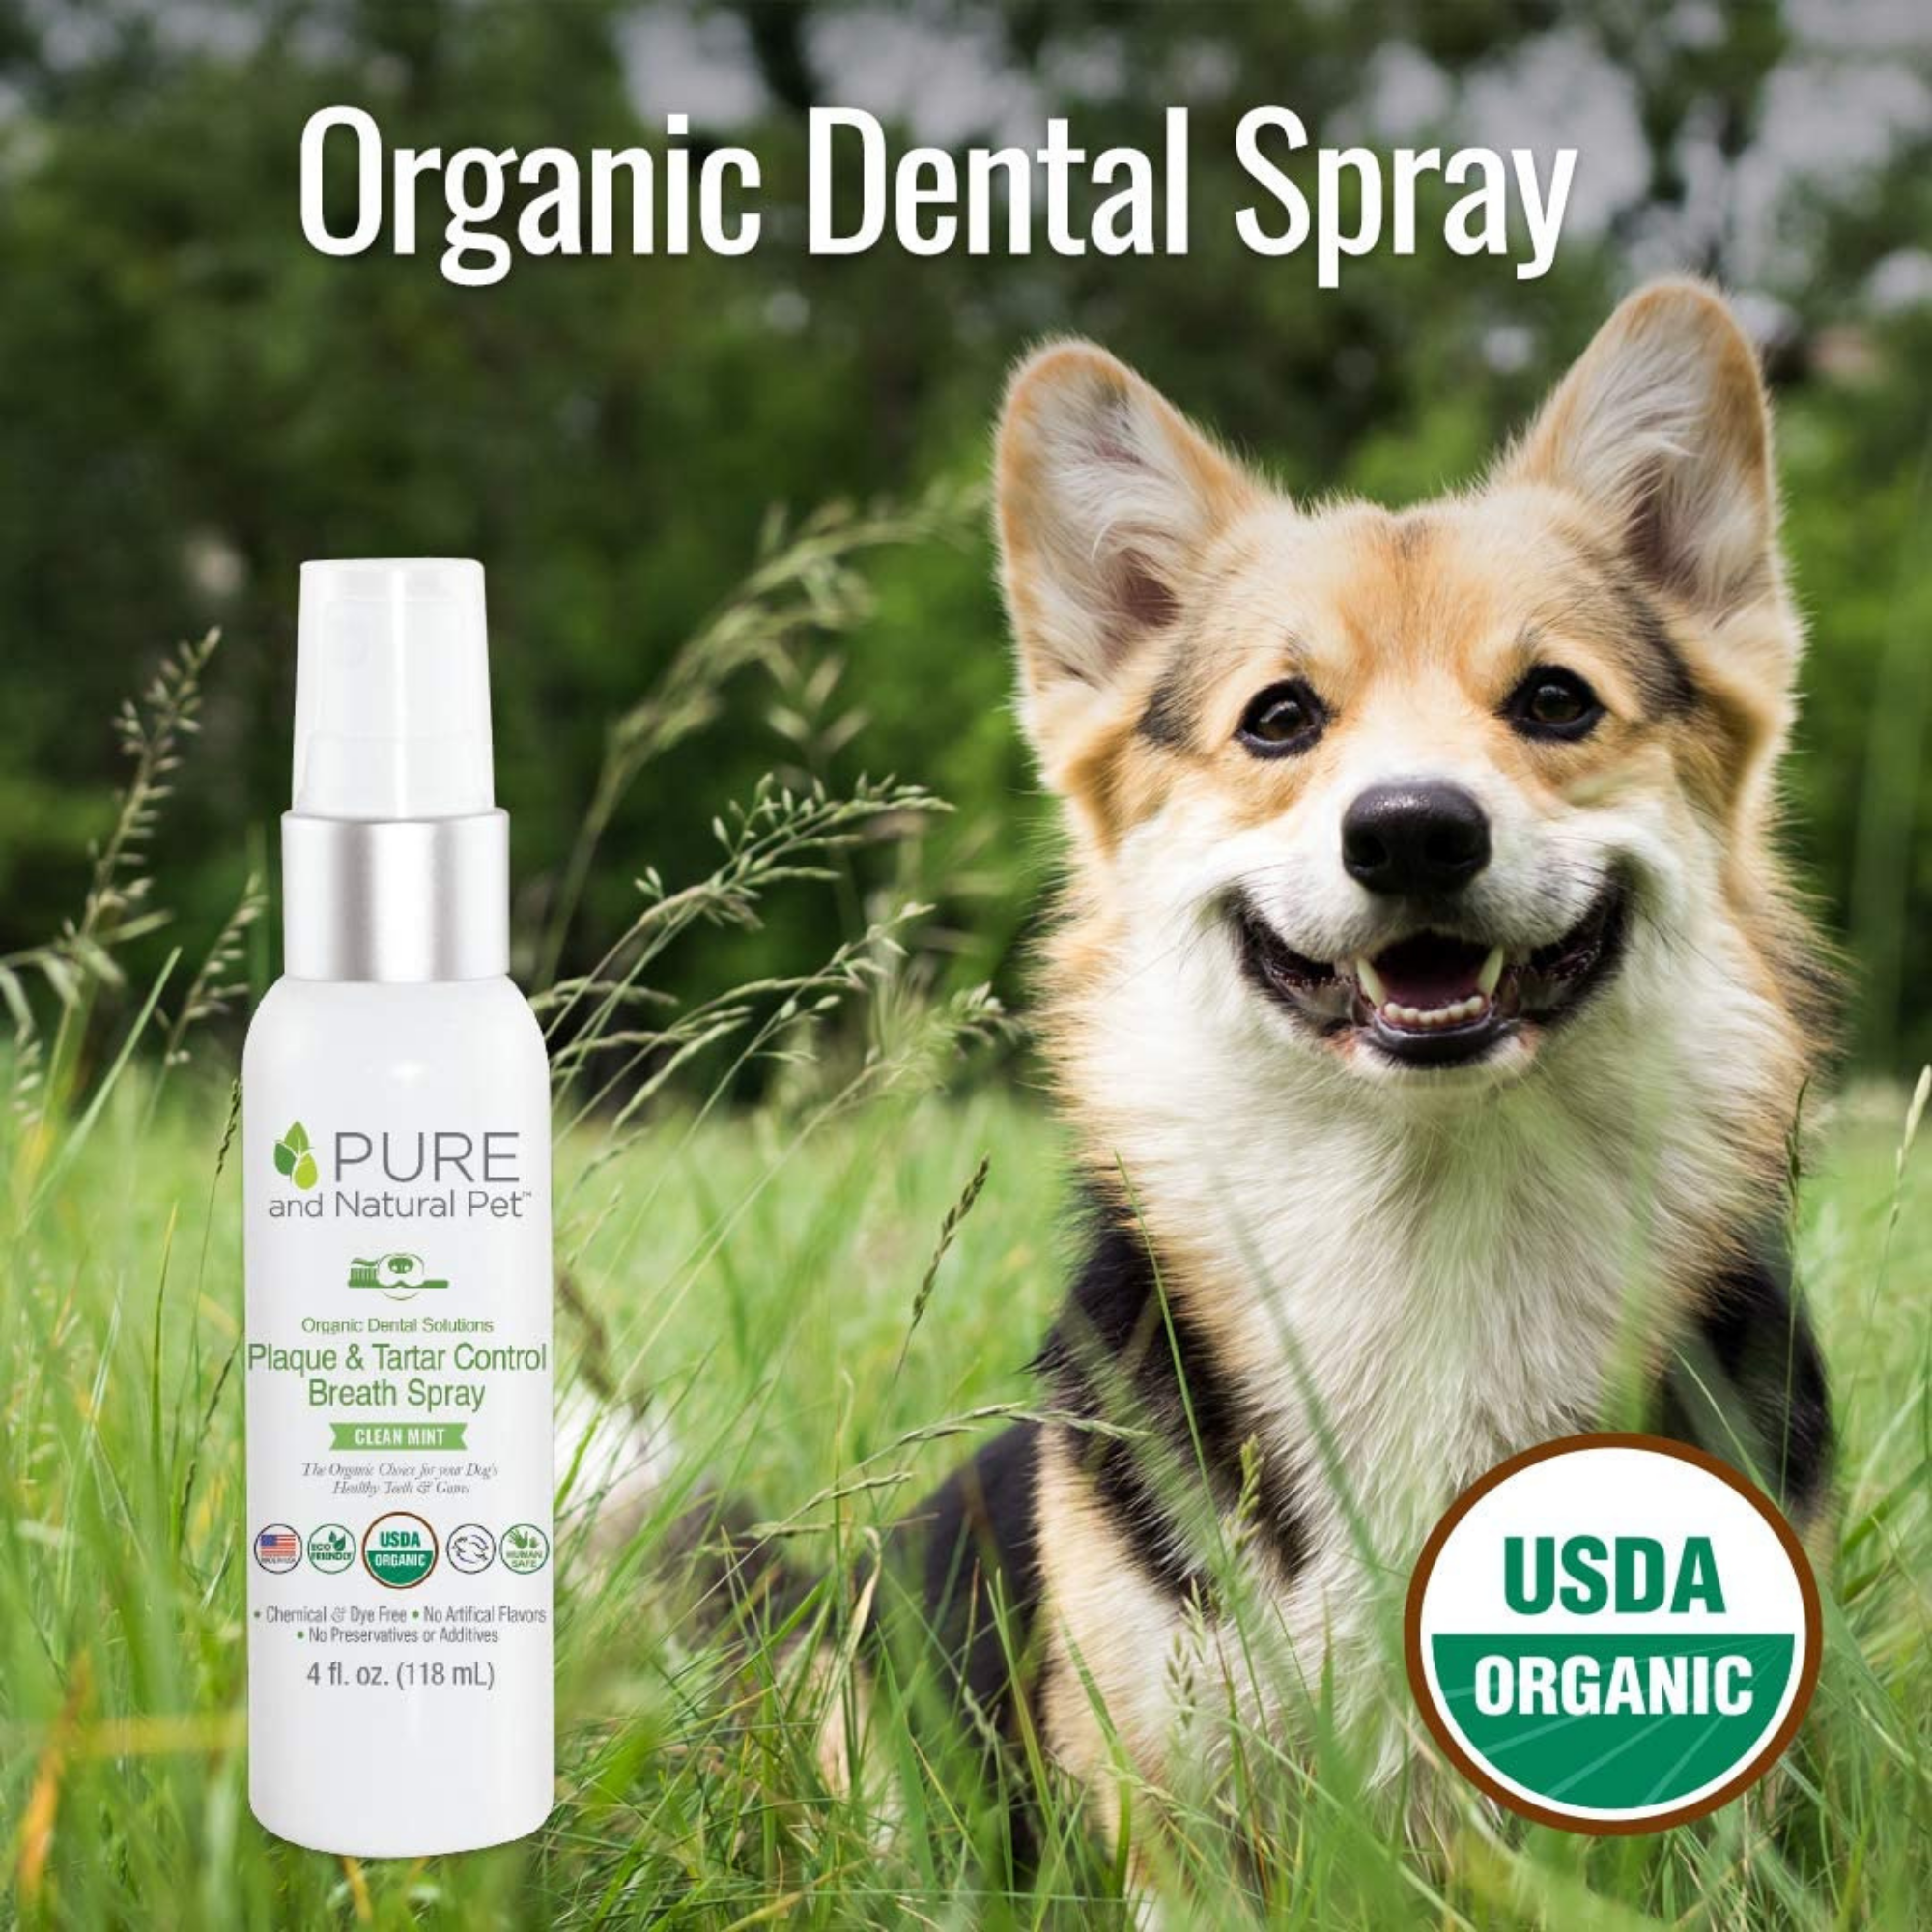 Pure and Natural Pet Organic Dental Solutions Plaque & Tartar Control Breath Spray for Dogs 4oz - Mutts & Co.